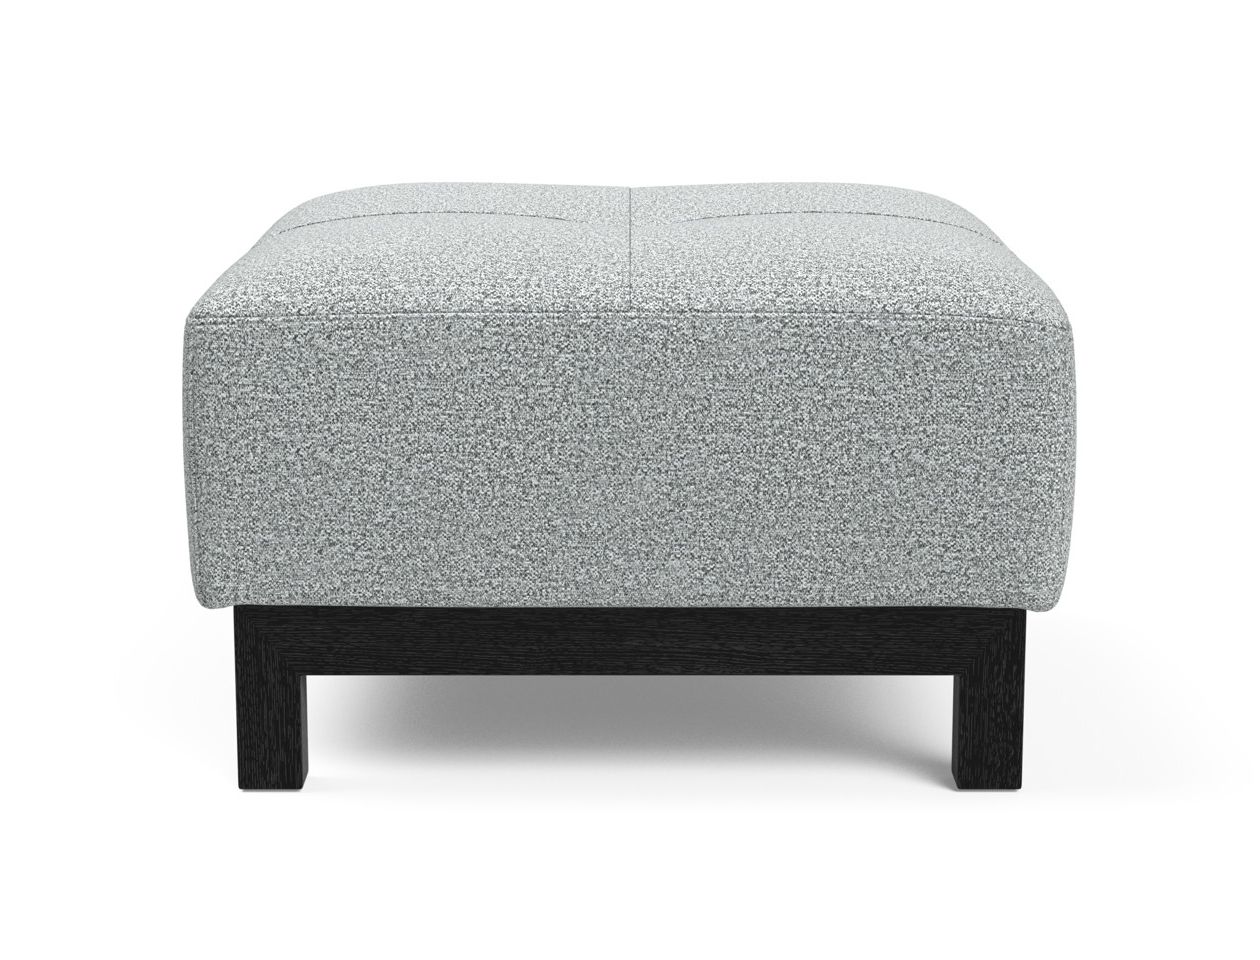 Latest Light Blue And Gray Solid Cube Pouf Ottomans With Deluxe Excess Ottoman Melange Light Gray, Black Wood Legsinnovation (View 10 of 10)